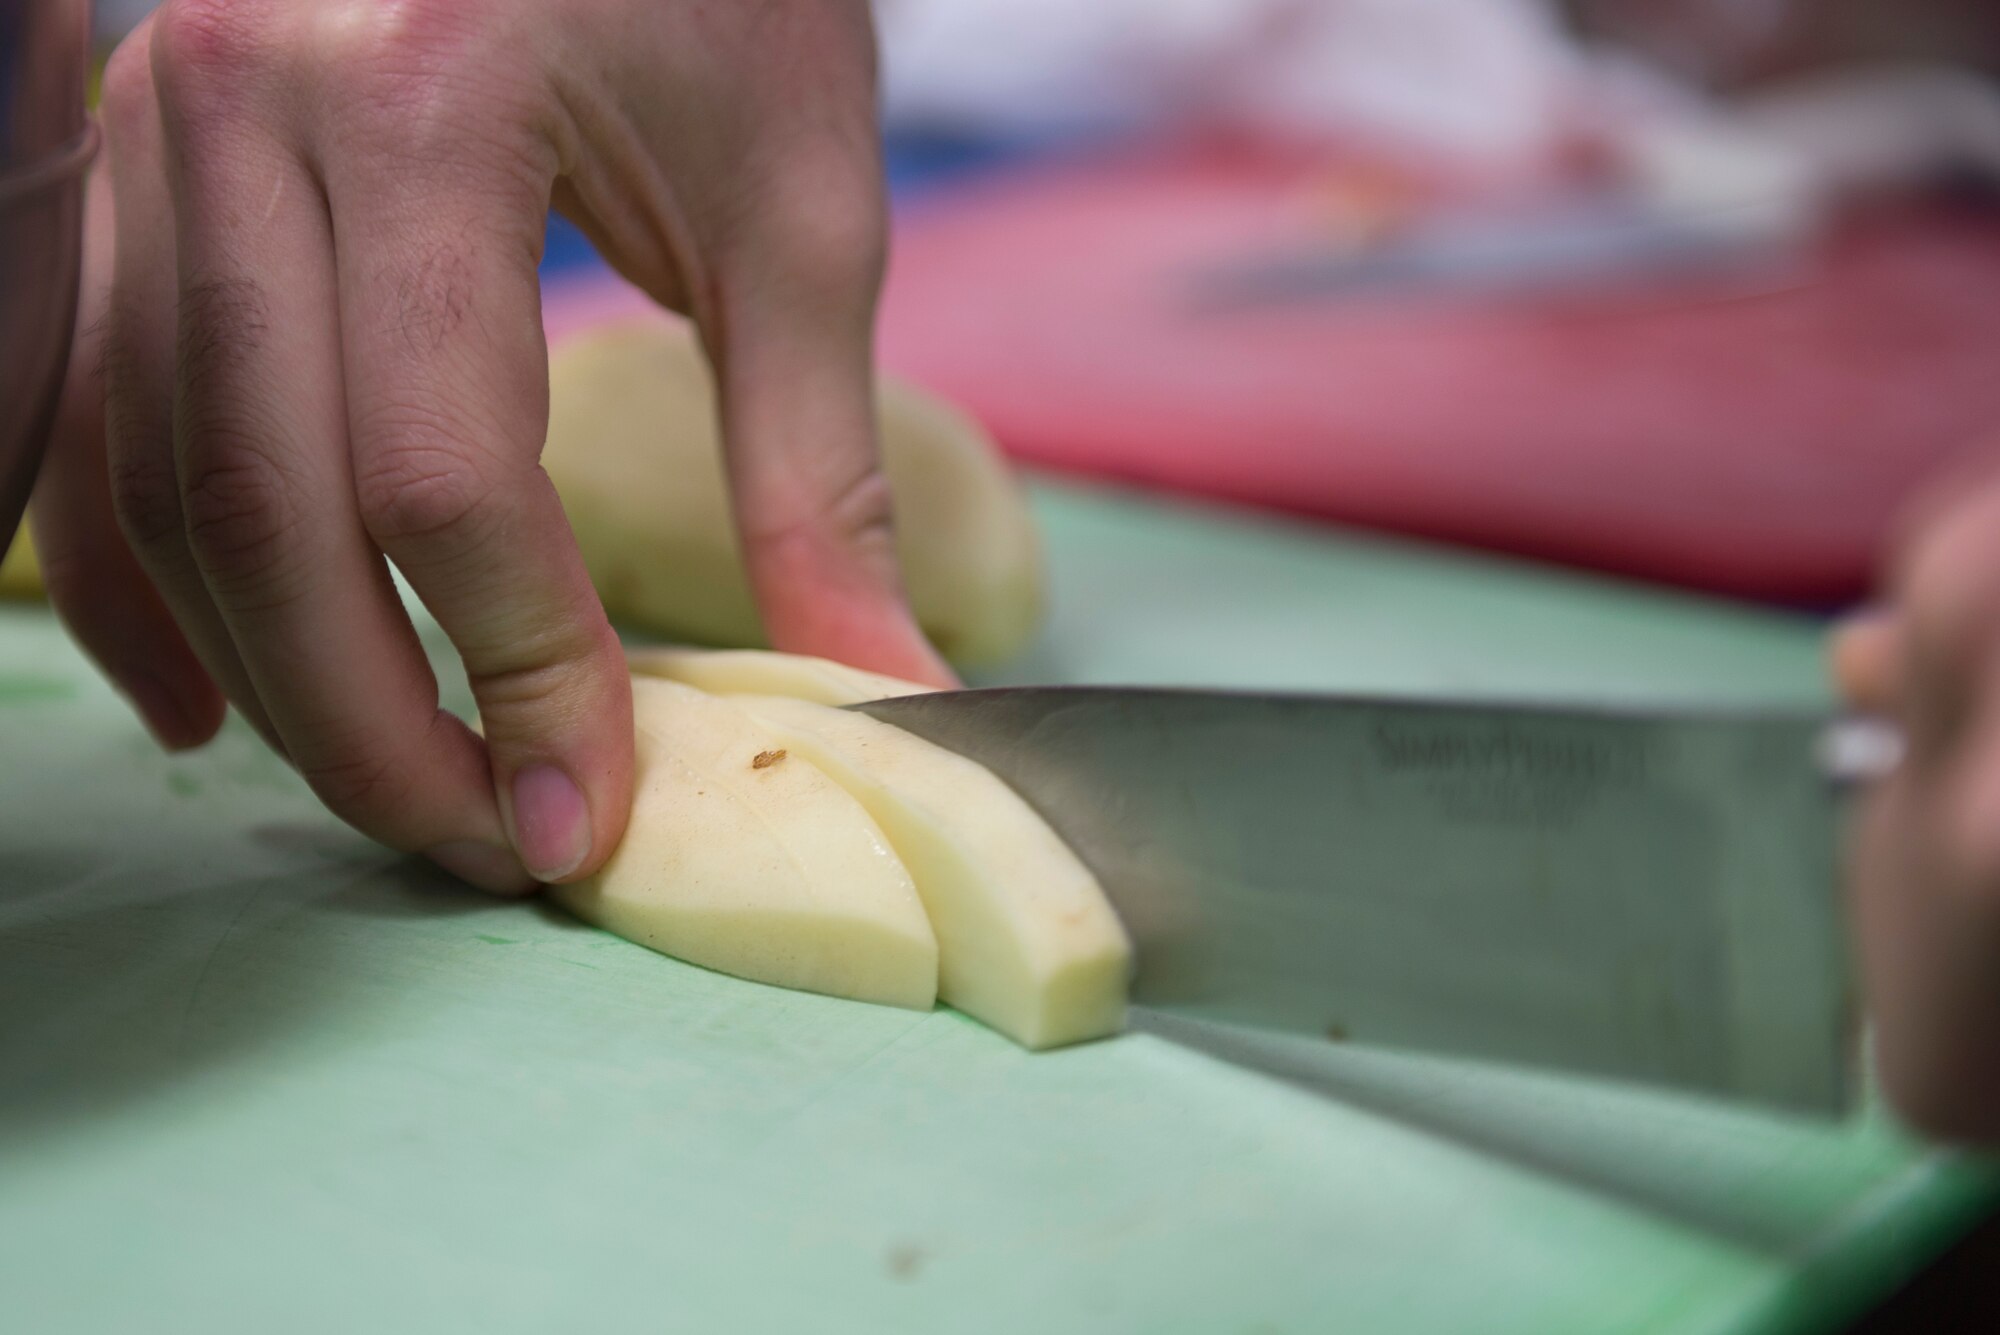 A competitor of the 2018 Grill Master competition at Luke Air Force Base, Ariz., slices a potato Feb. 23, 2018. Competitors, forming teams of two, cooked a meal for three judges who tasted and graded their finished product based on presentation, flavor and creativity. (U.S. Air Force photo/Senior Airman Ridge Shan)